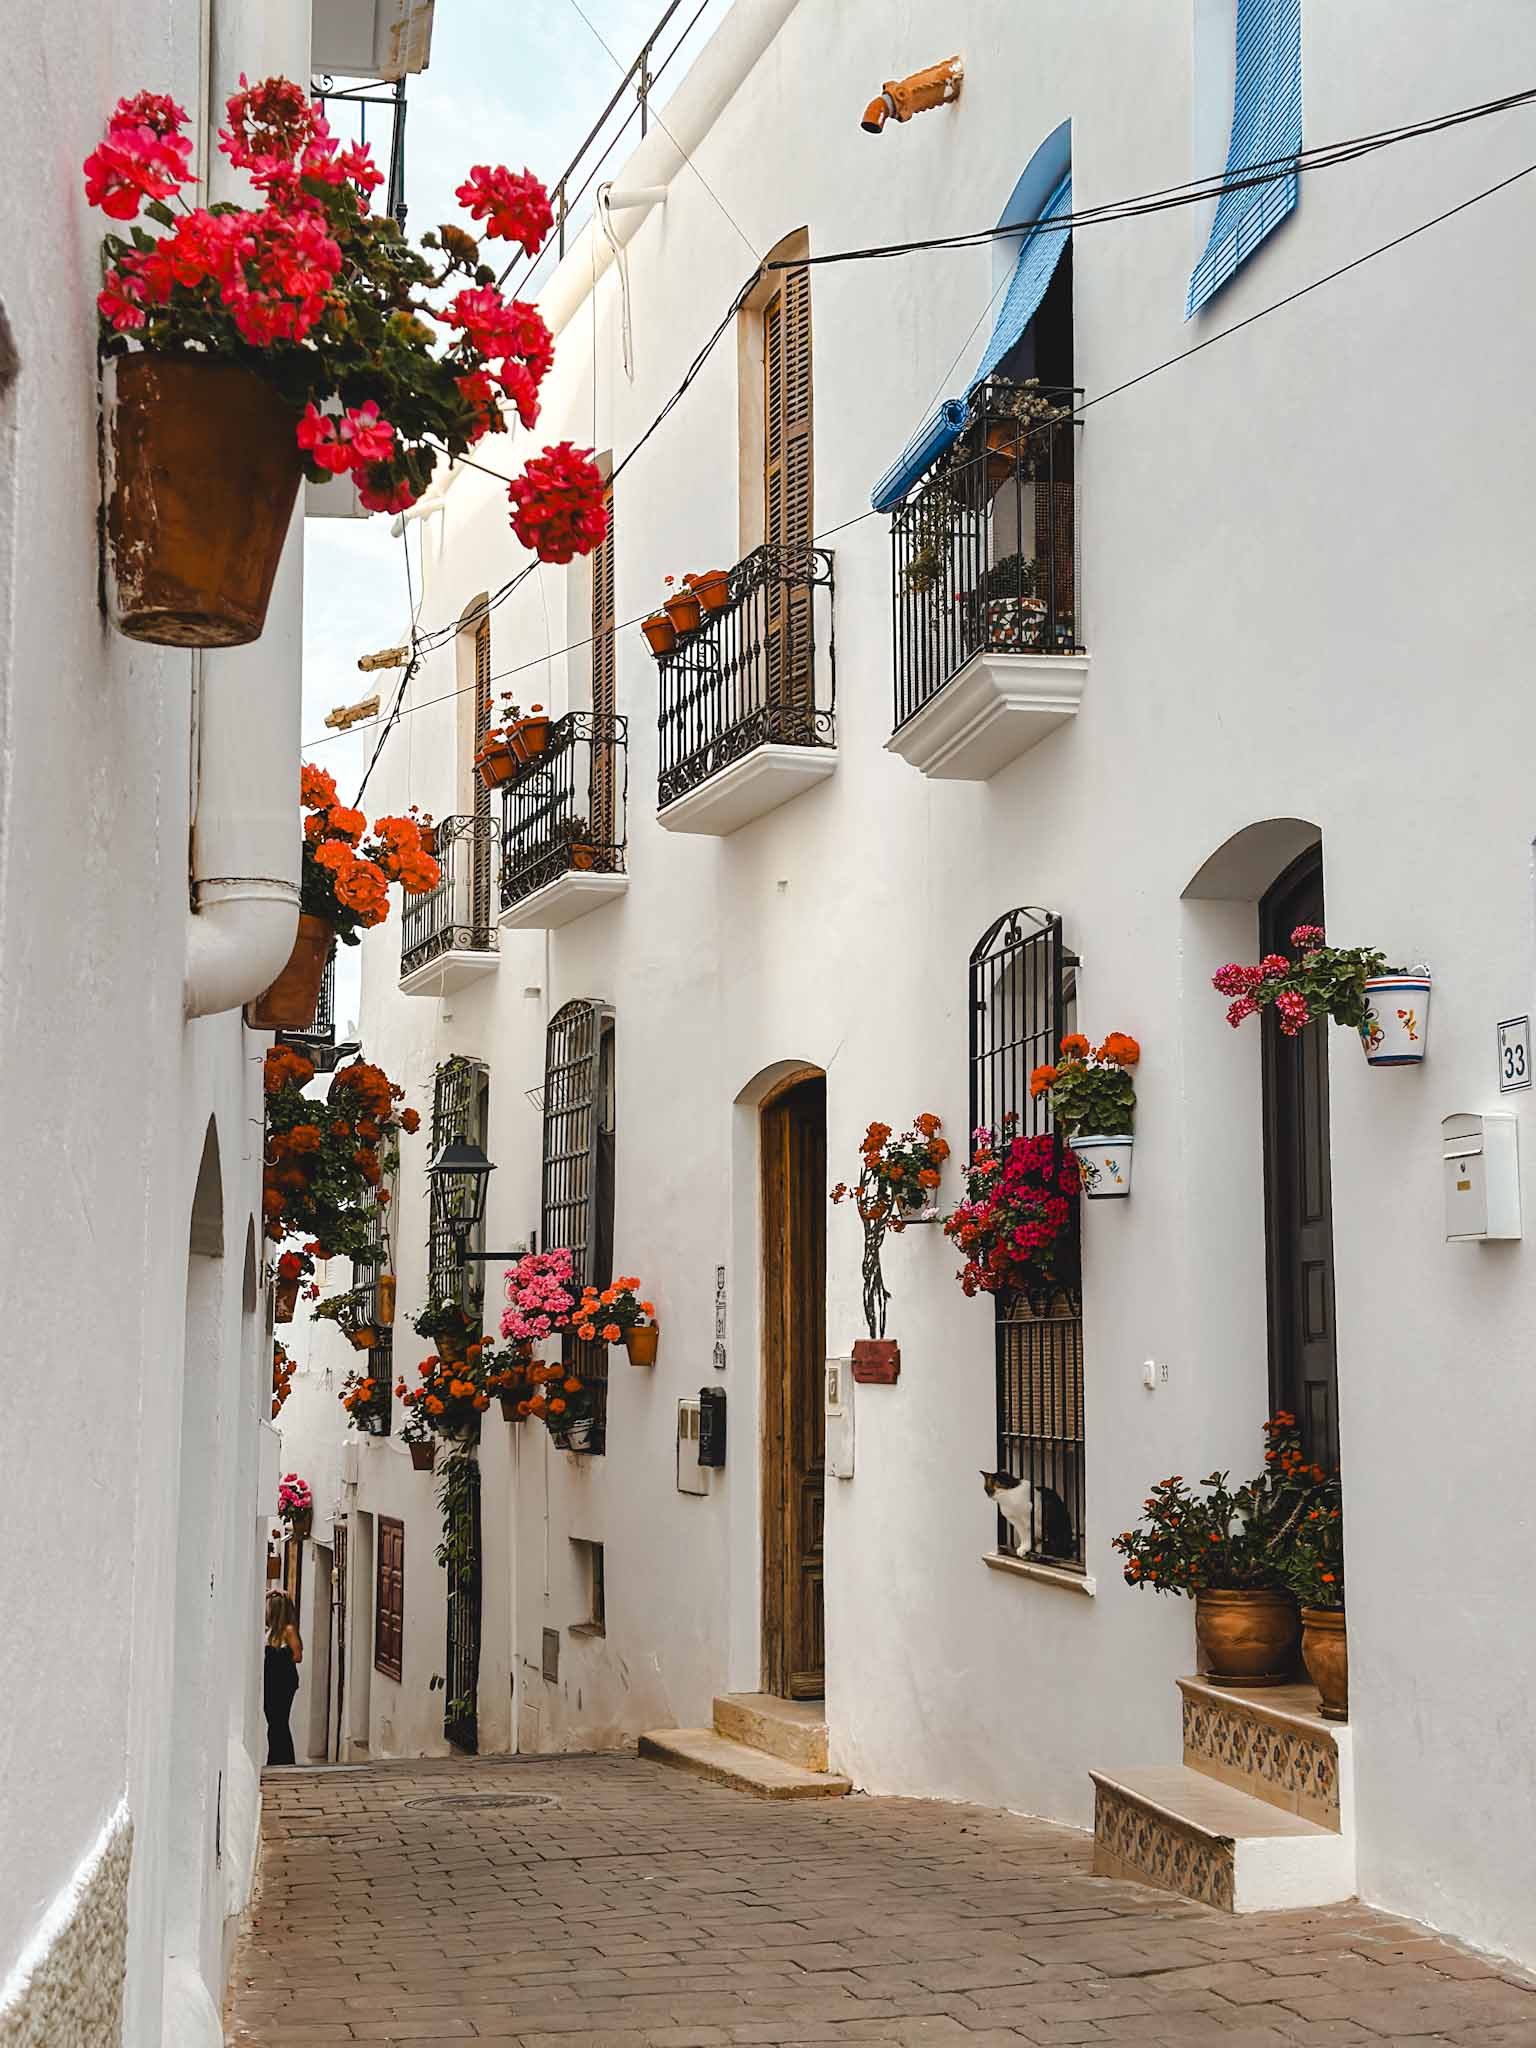 Most beautiful whitewashed villages and unique towns in Andalusia, Spain - Mojácar